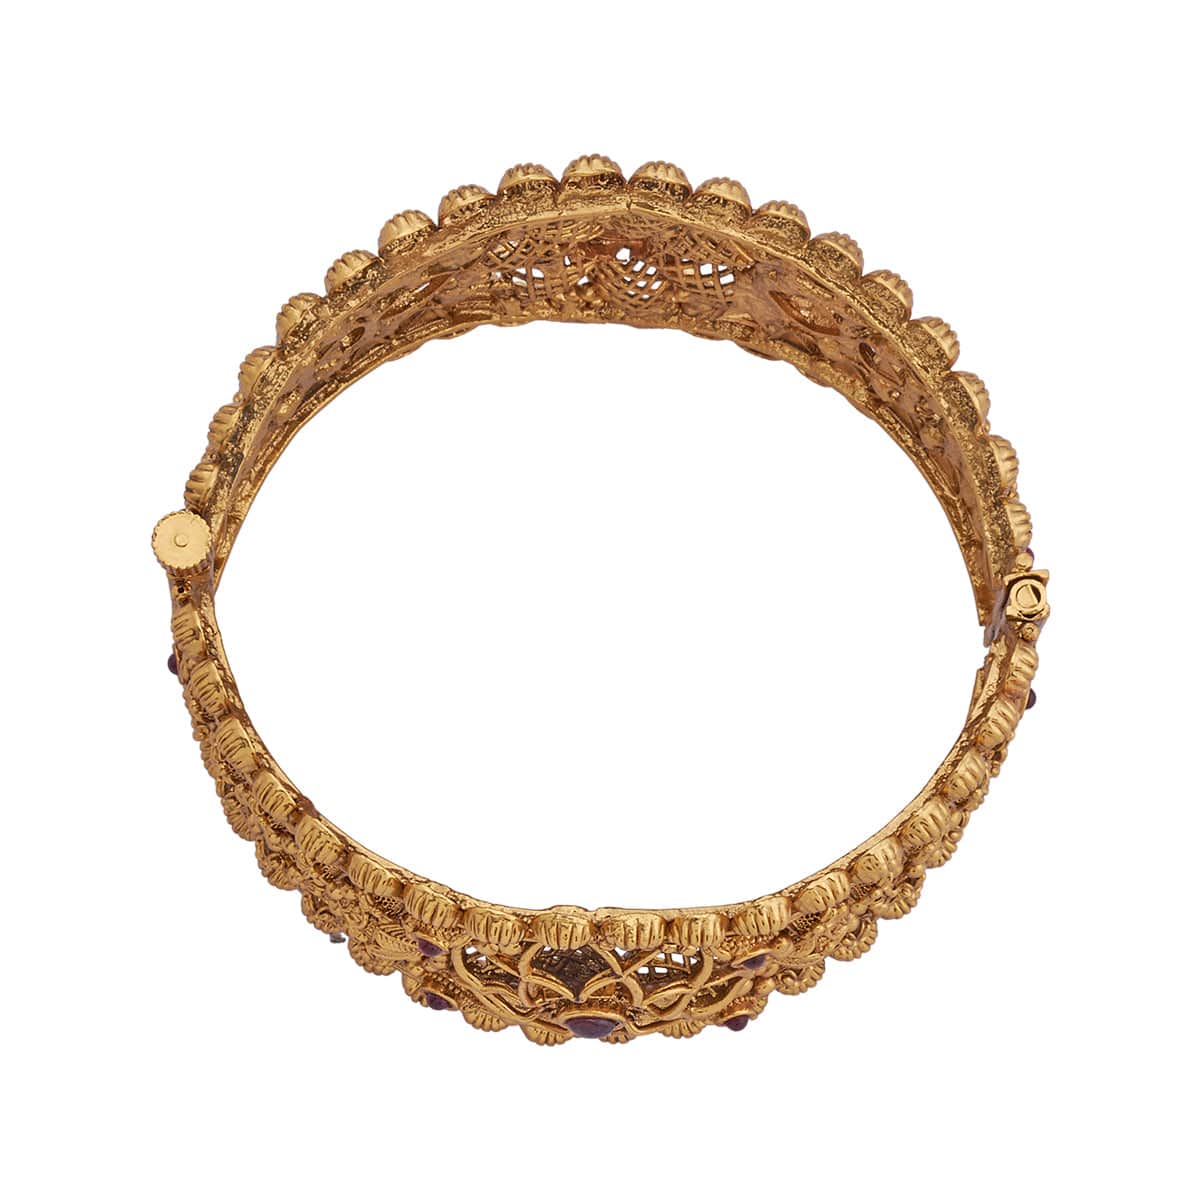 Shree Aakarshan Antique Gold Plated Bracelet at Rs 1912/piece in Bengaluru  | ID: 15792293255